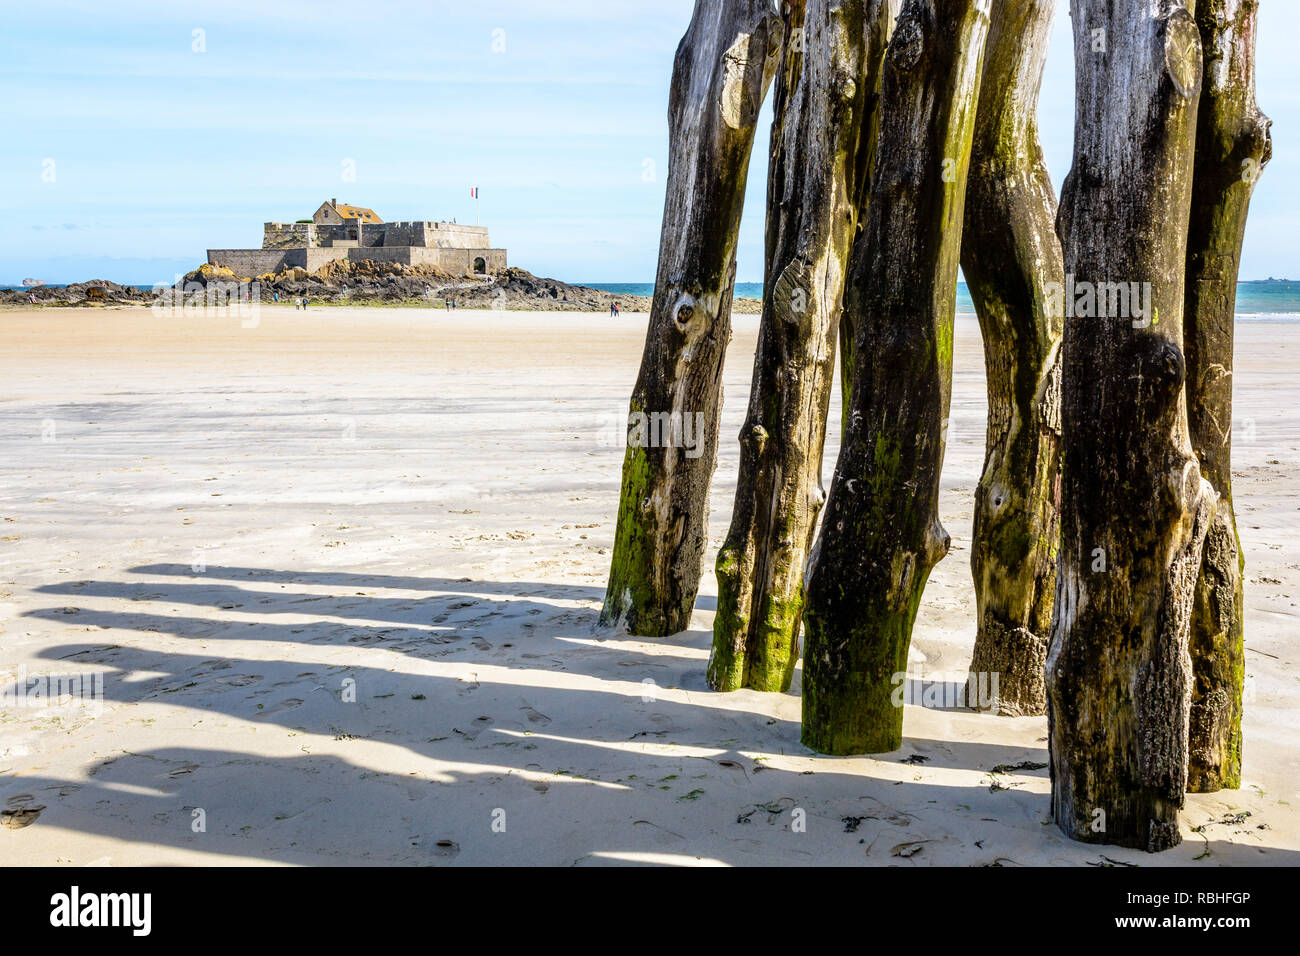 The Fort National, built off the coast of Saint-Malo in Brittany, seen from the beach at low tide with wooden breakwater posts in the foreground. Stock Photo